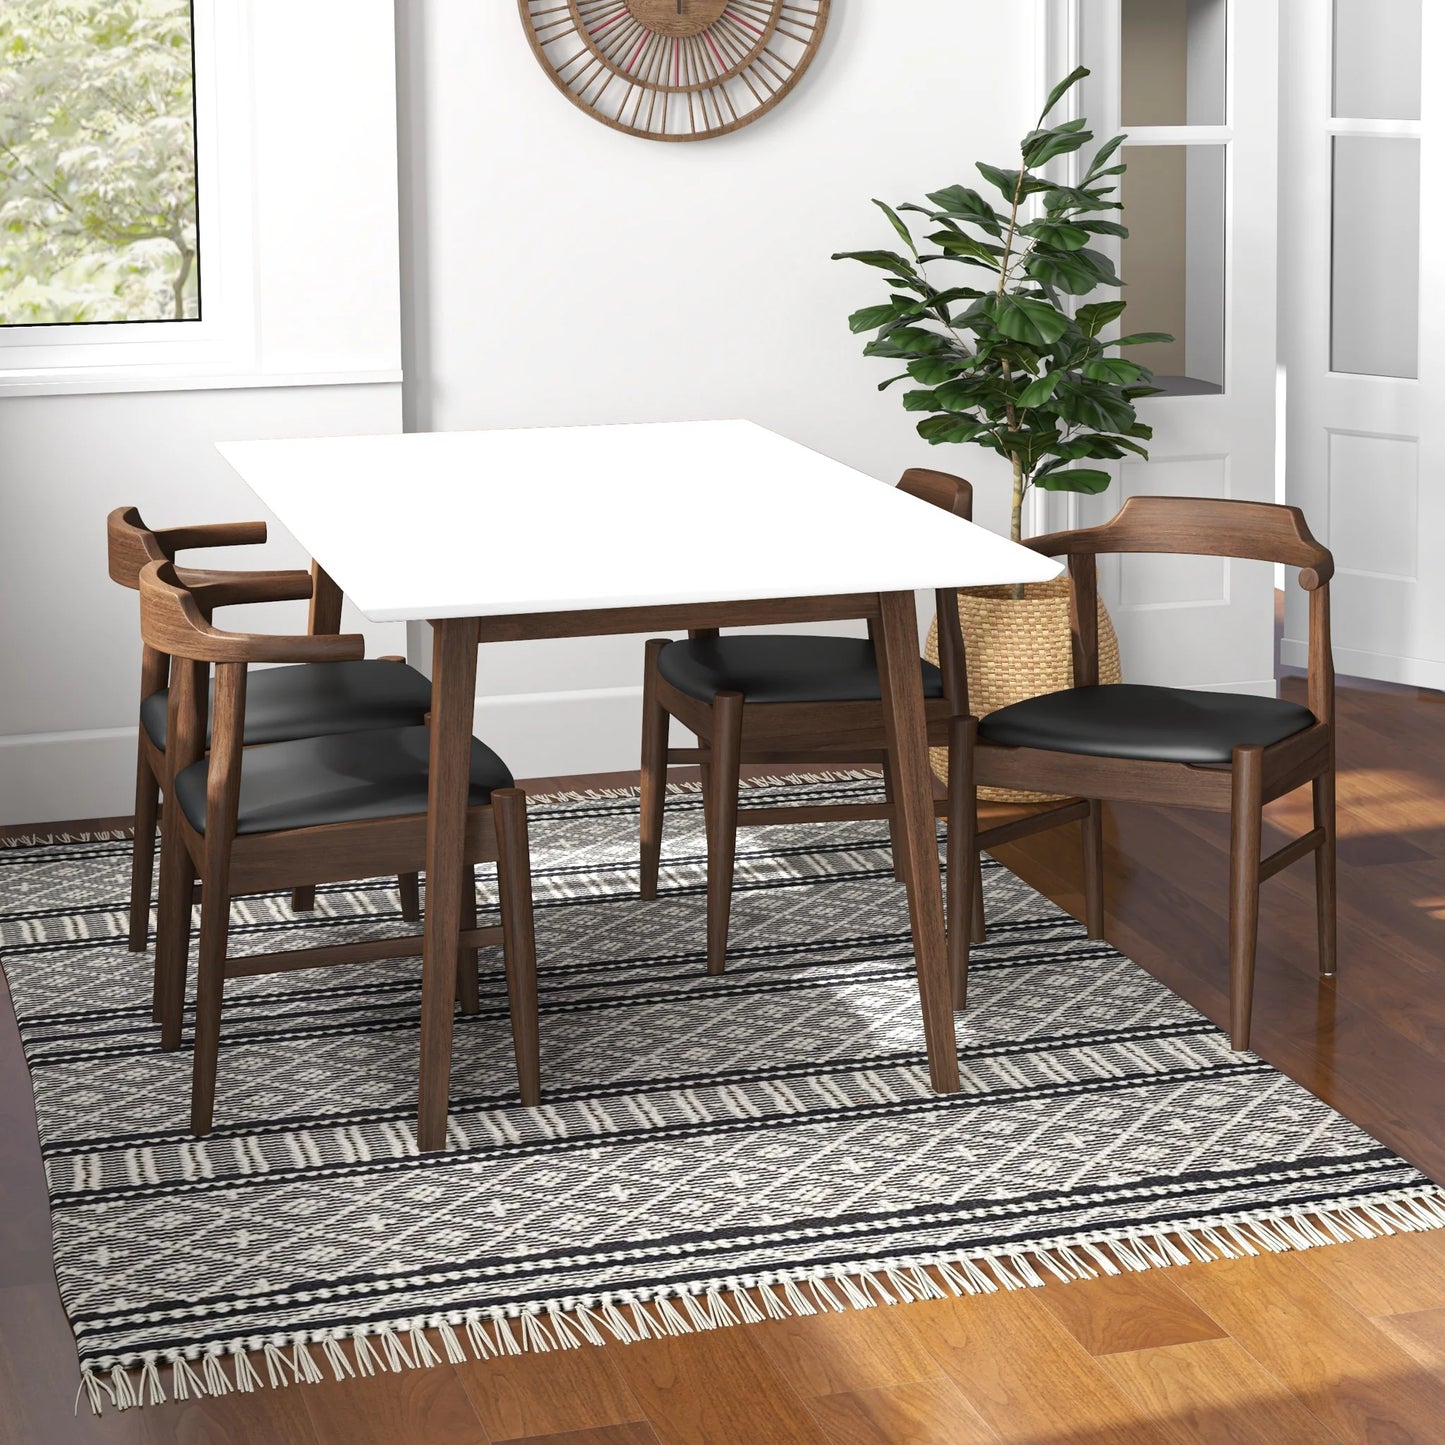 Alpine (Large - White) Dining Set with 4 Sterling (Black Leather) Dining Chairs